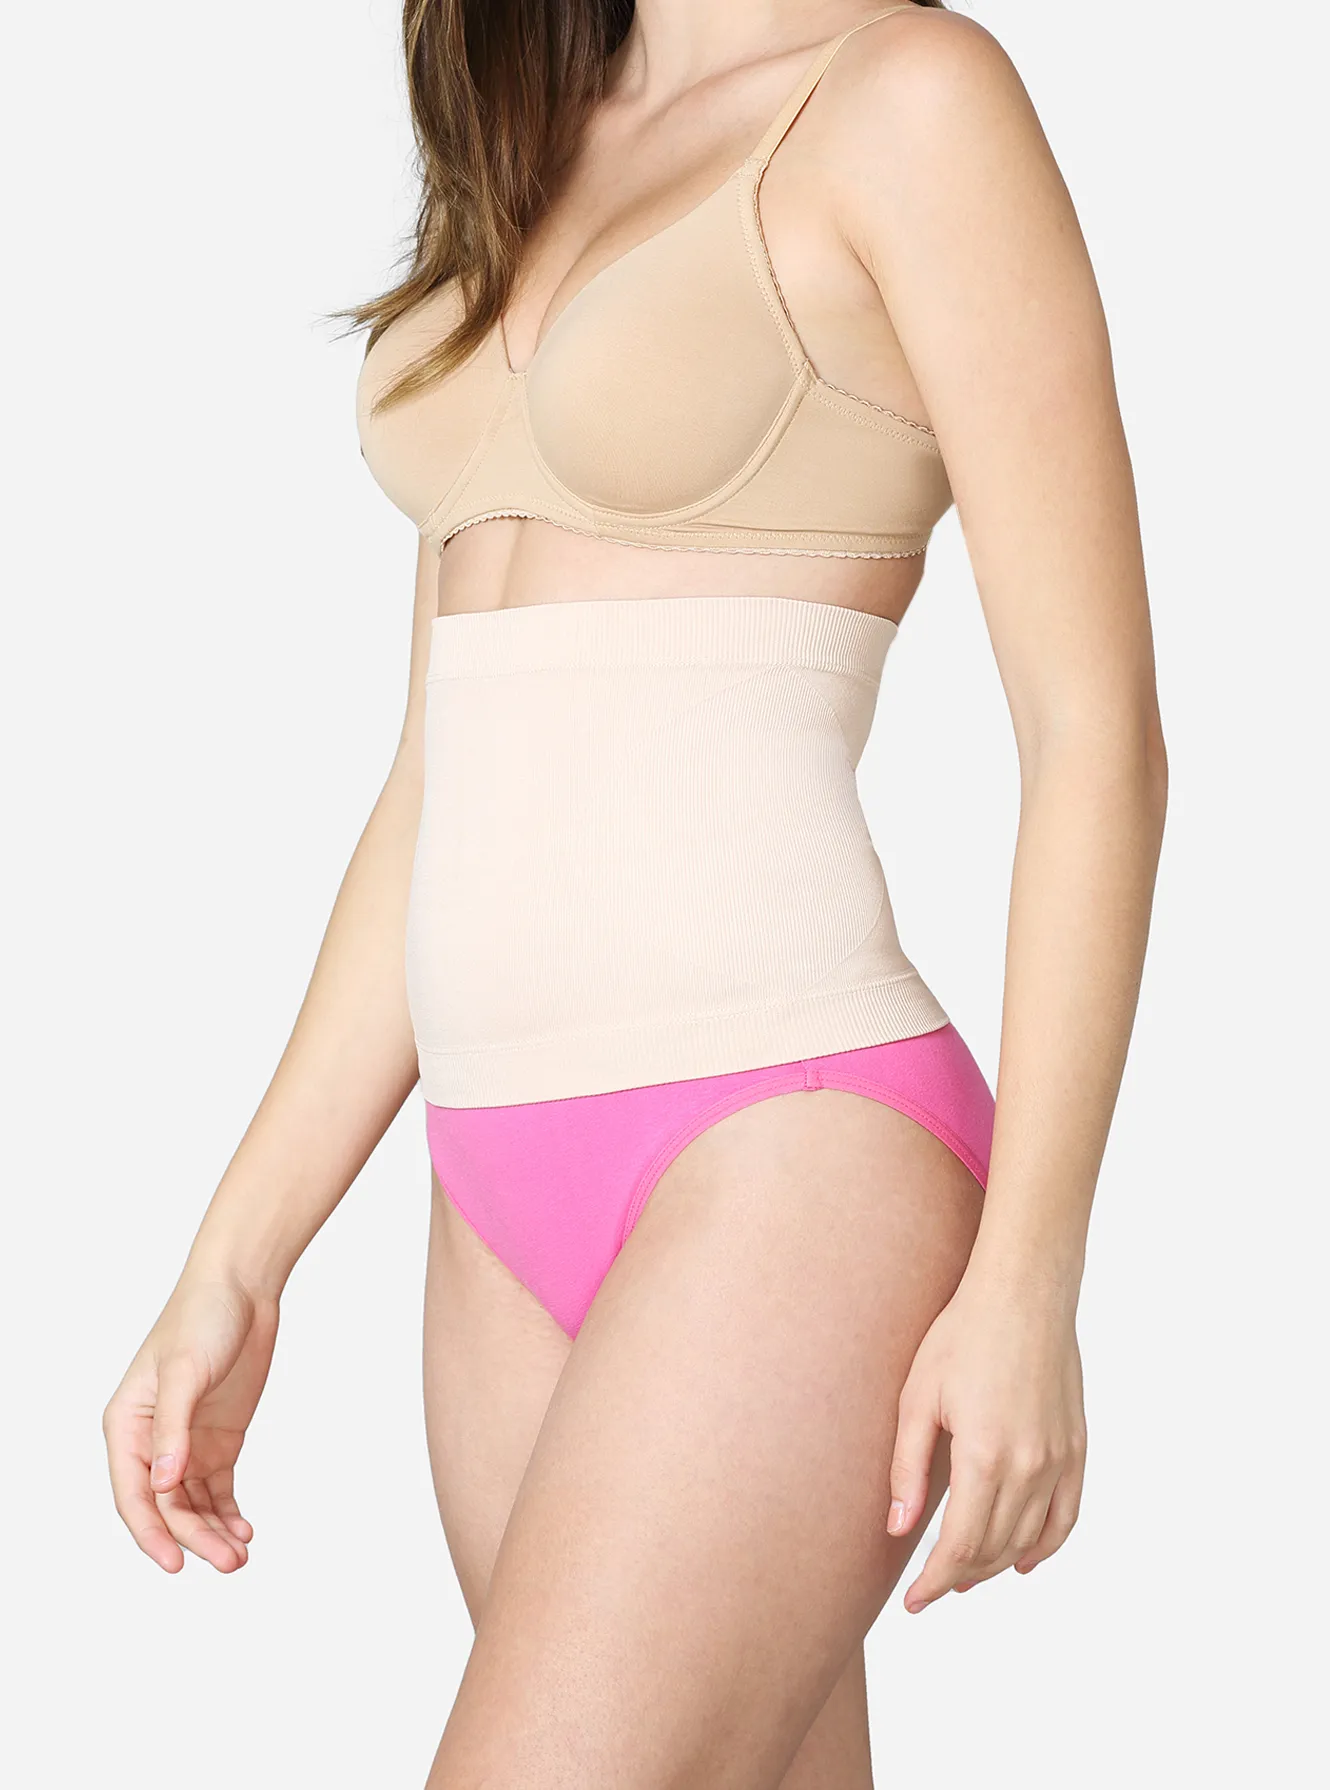 Cotton spandex bra with removable cookie pads